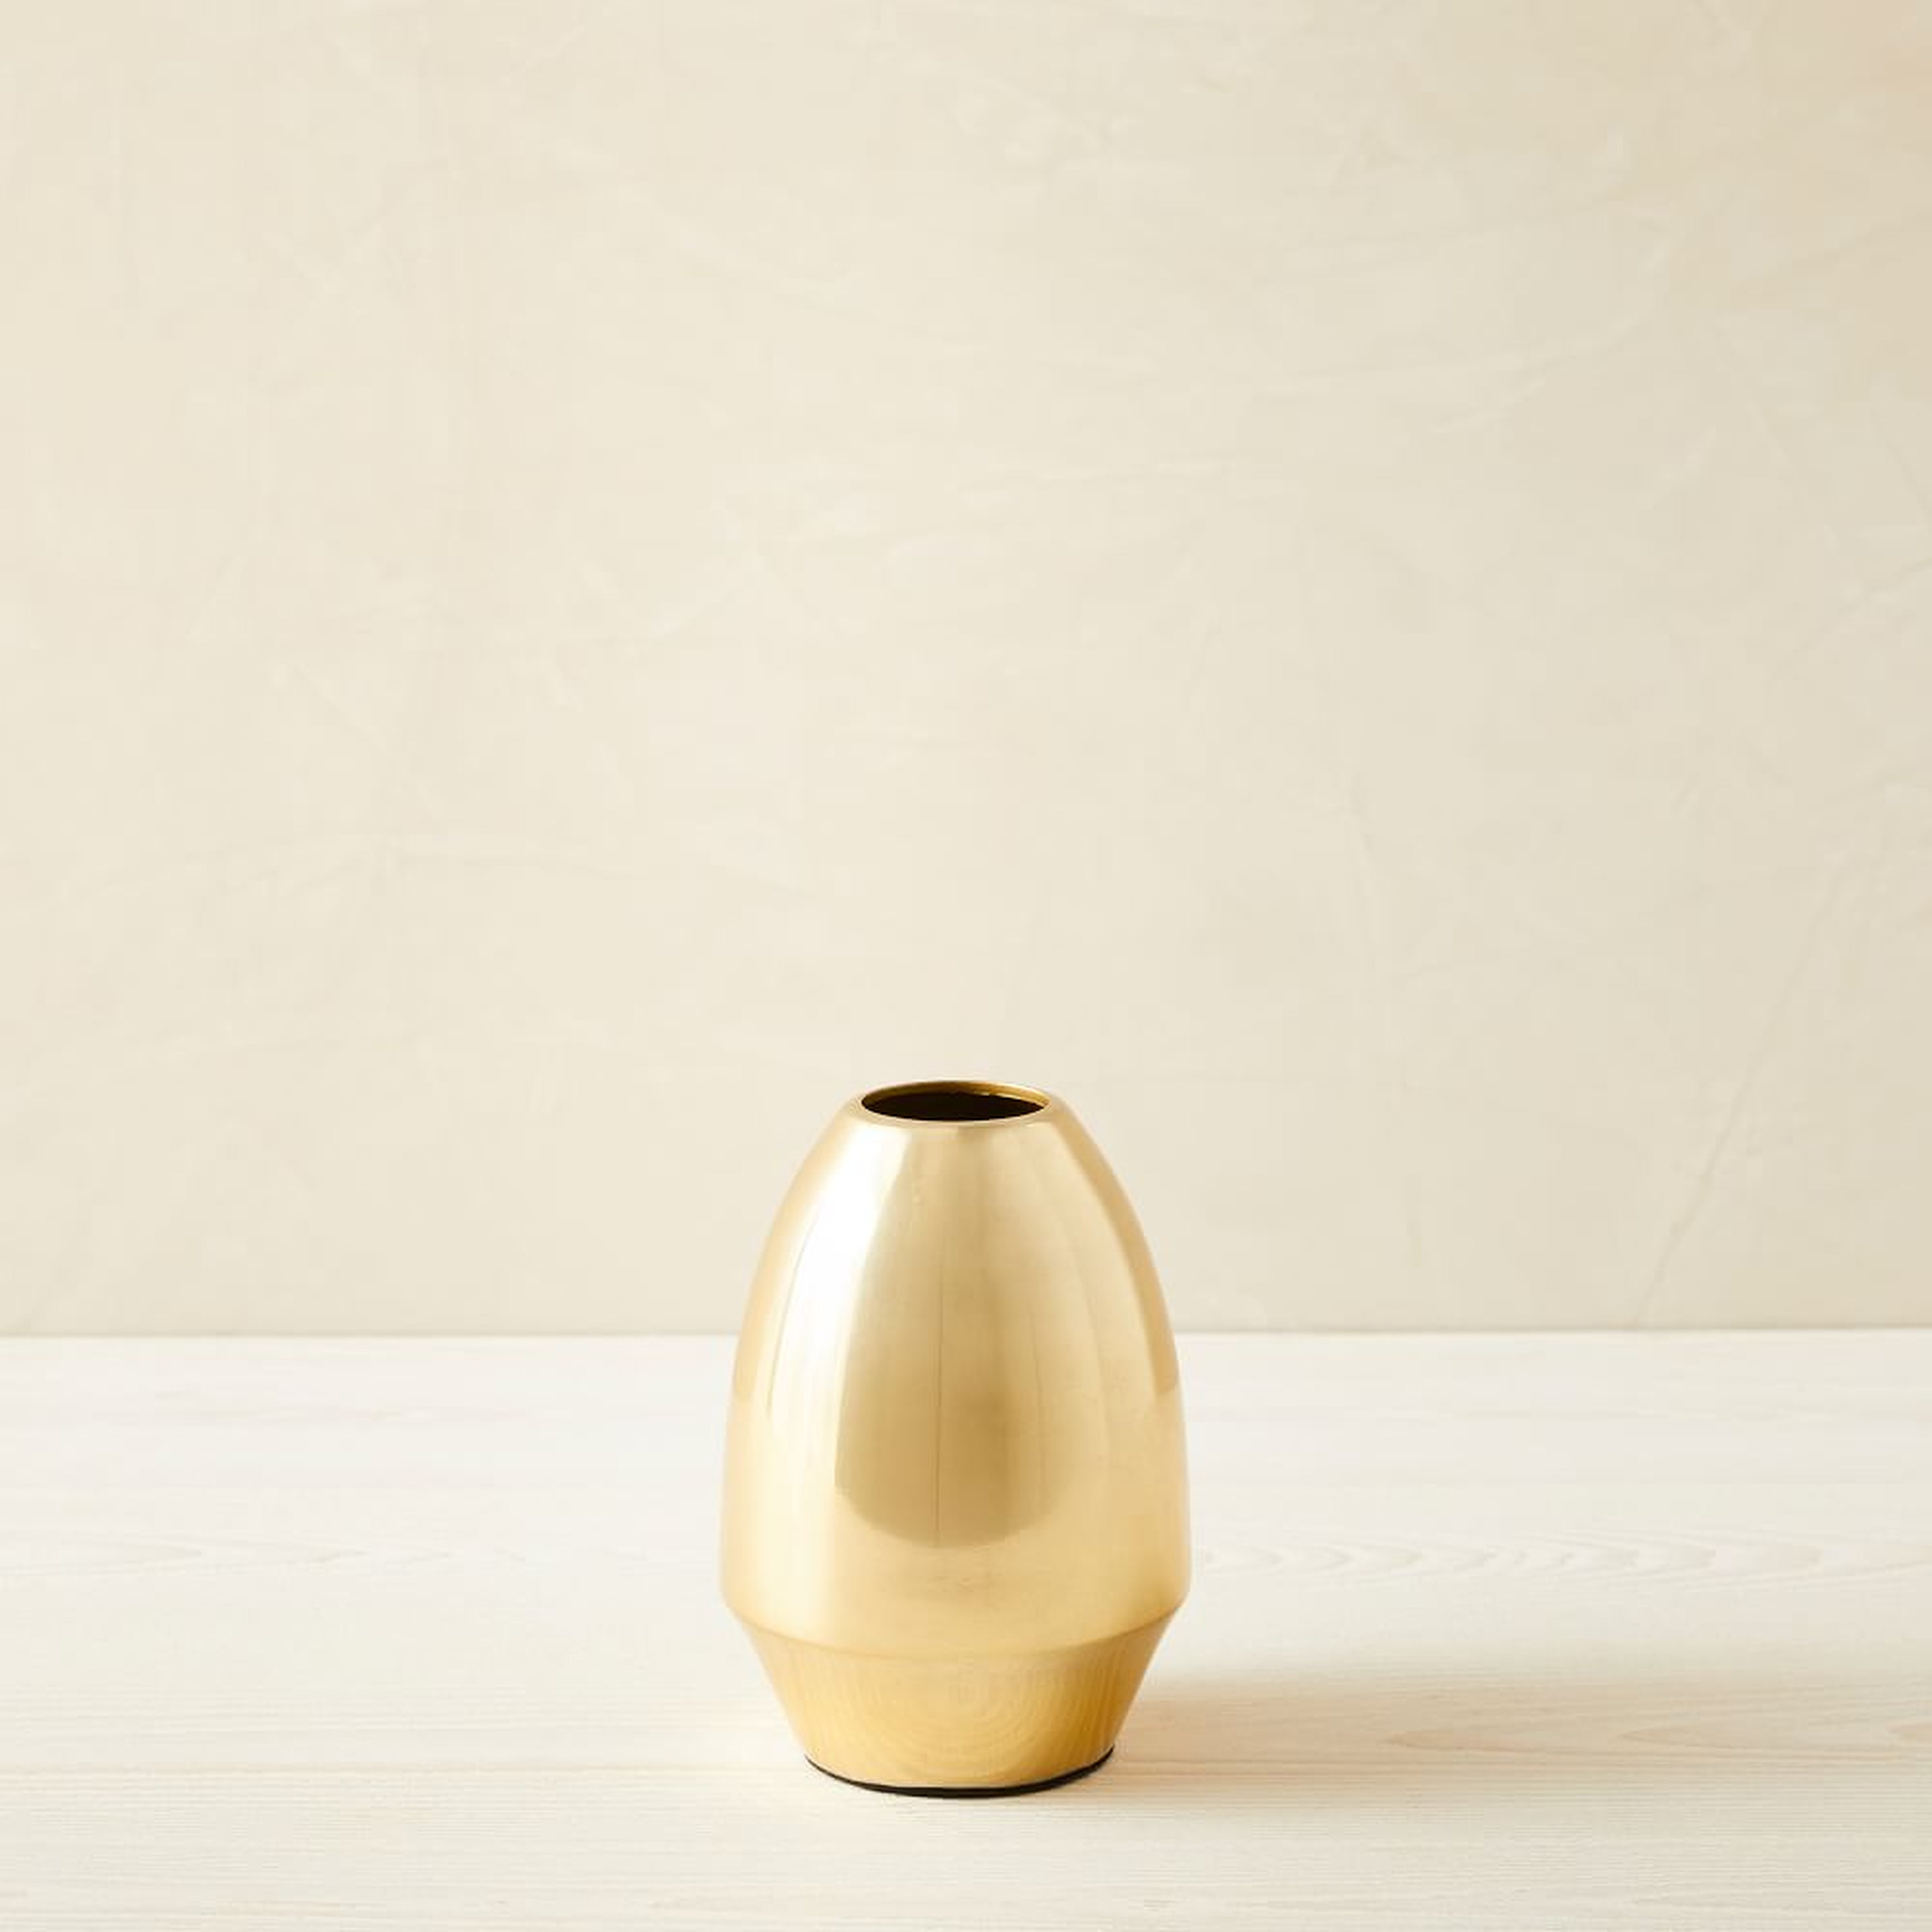 Foundations Metal Vases, Small Vase, Antique Brass, Metal, 7.5 Inch Height - West Elm